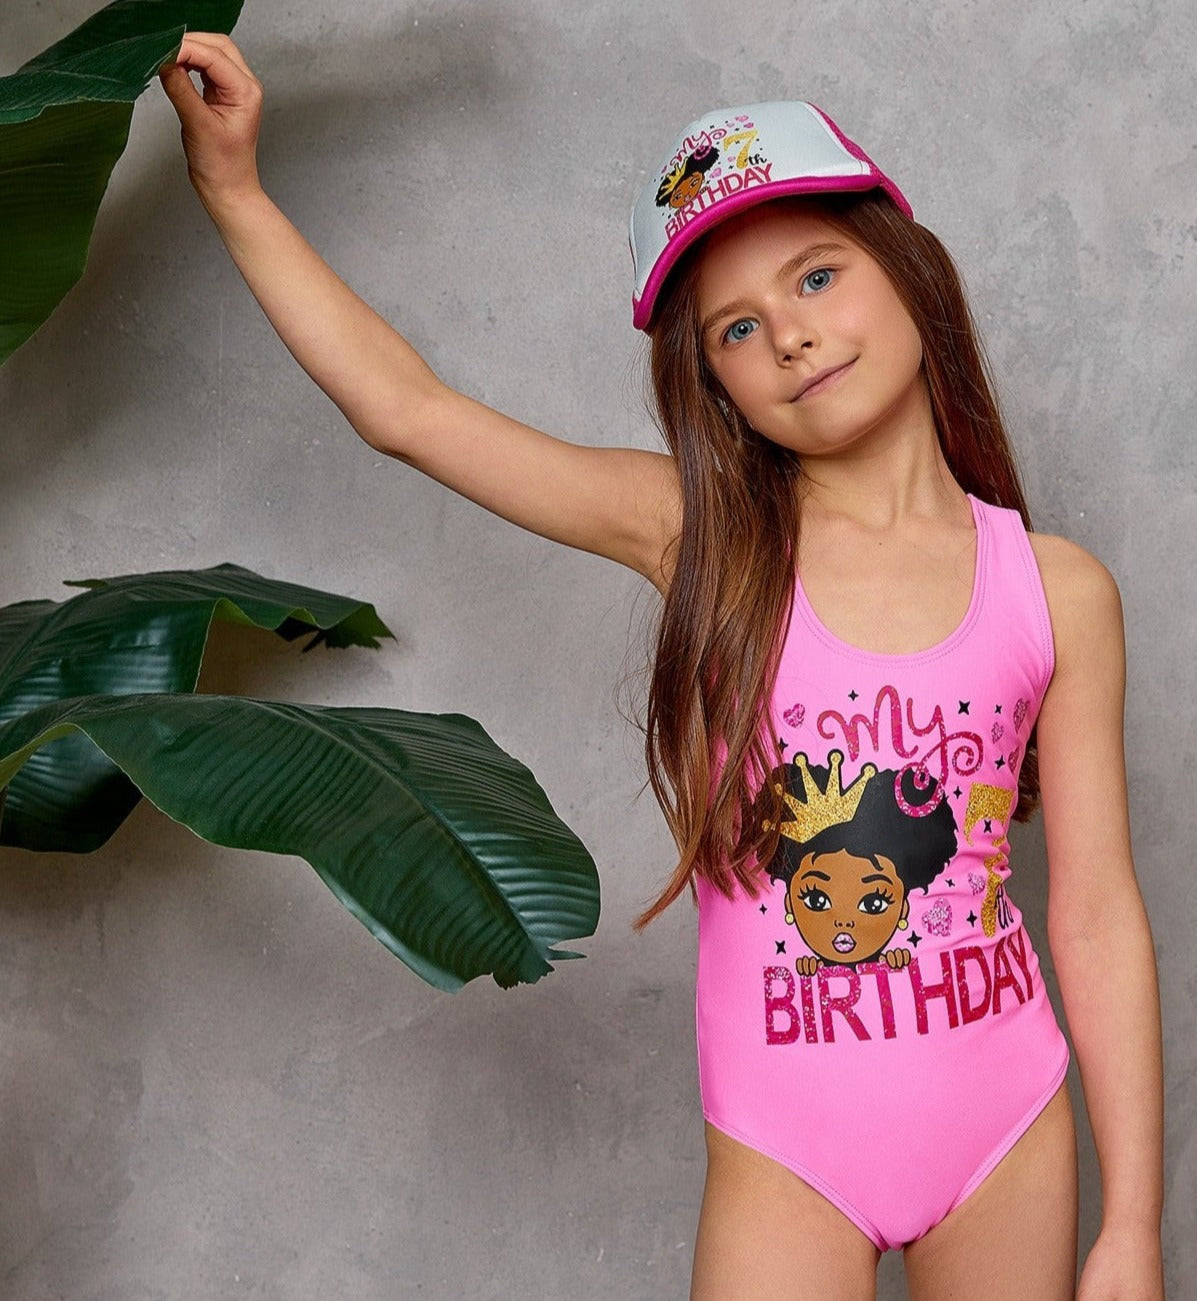 Kids Birthday Princess/Squad Swimsuit, Personalized Kids Swimsuits, Personalized One Piece Girl Swimsuit, Kids Pool Party Swims, Custom Bathing Suits